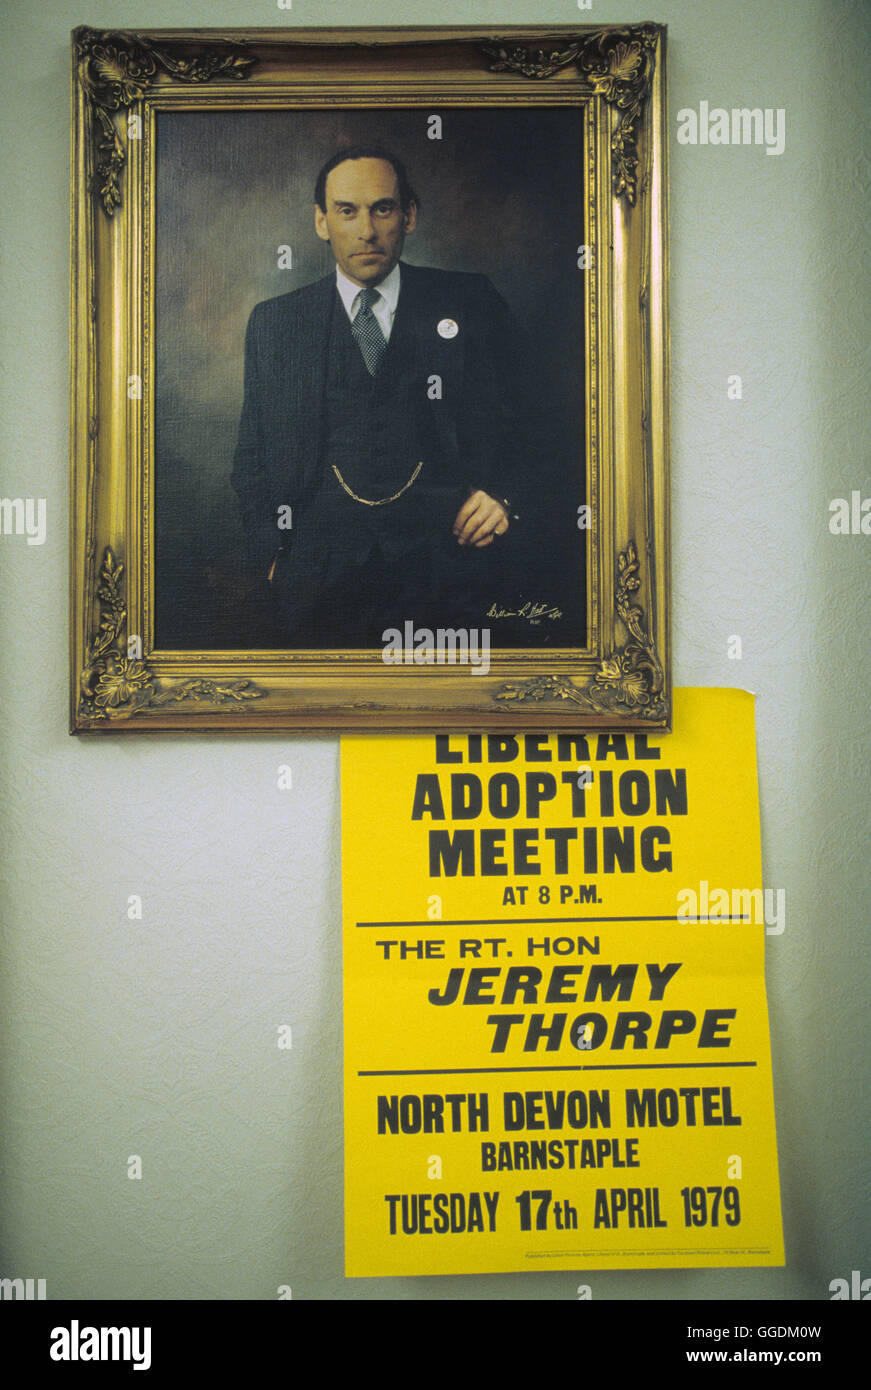 Jeremy Thorpe MP 1970s 'Thorpe works for us' his election slogan. Jeremy Thorpe a British politician who served as the Member of Parliament for North Devon from 1959 to 1979 on the election campaign trail in his North Devon constituency meeting and greeting. He lost his liberal parliamentary seat in thats years general election. Devon, England circa April 1979. Barnstable Devon UK HOMER SYKES Stock Photo